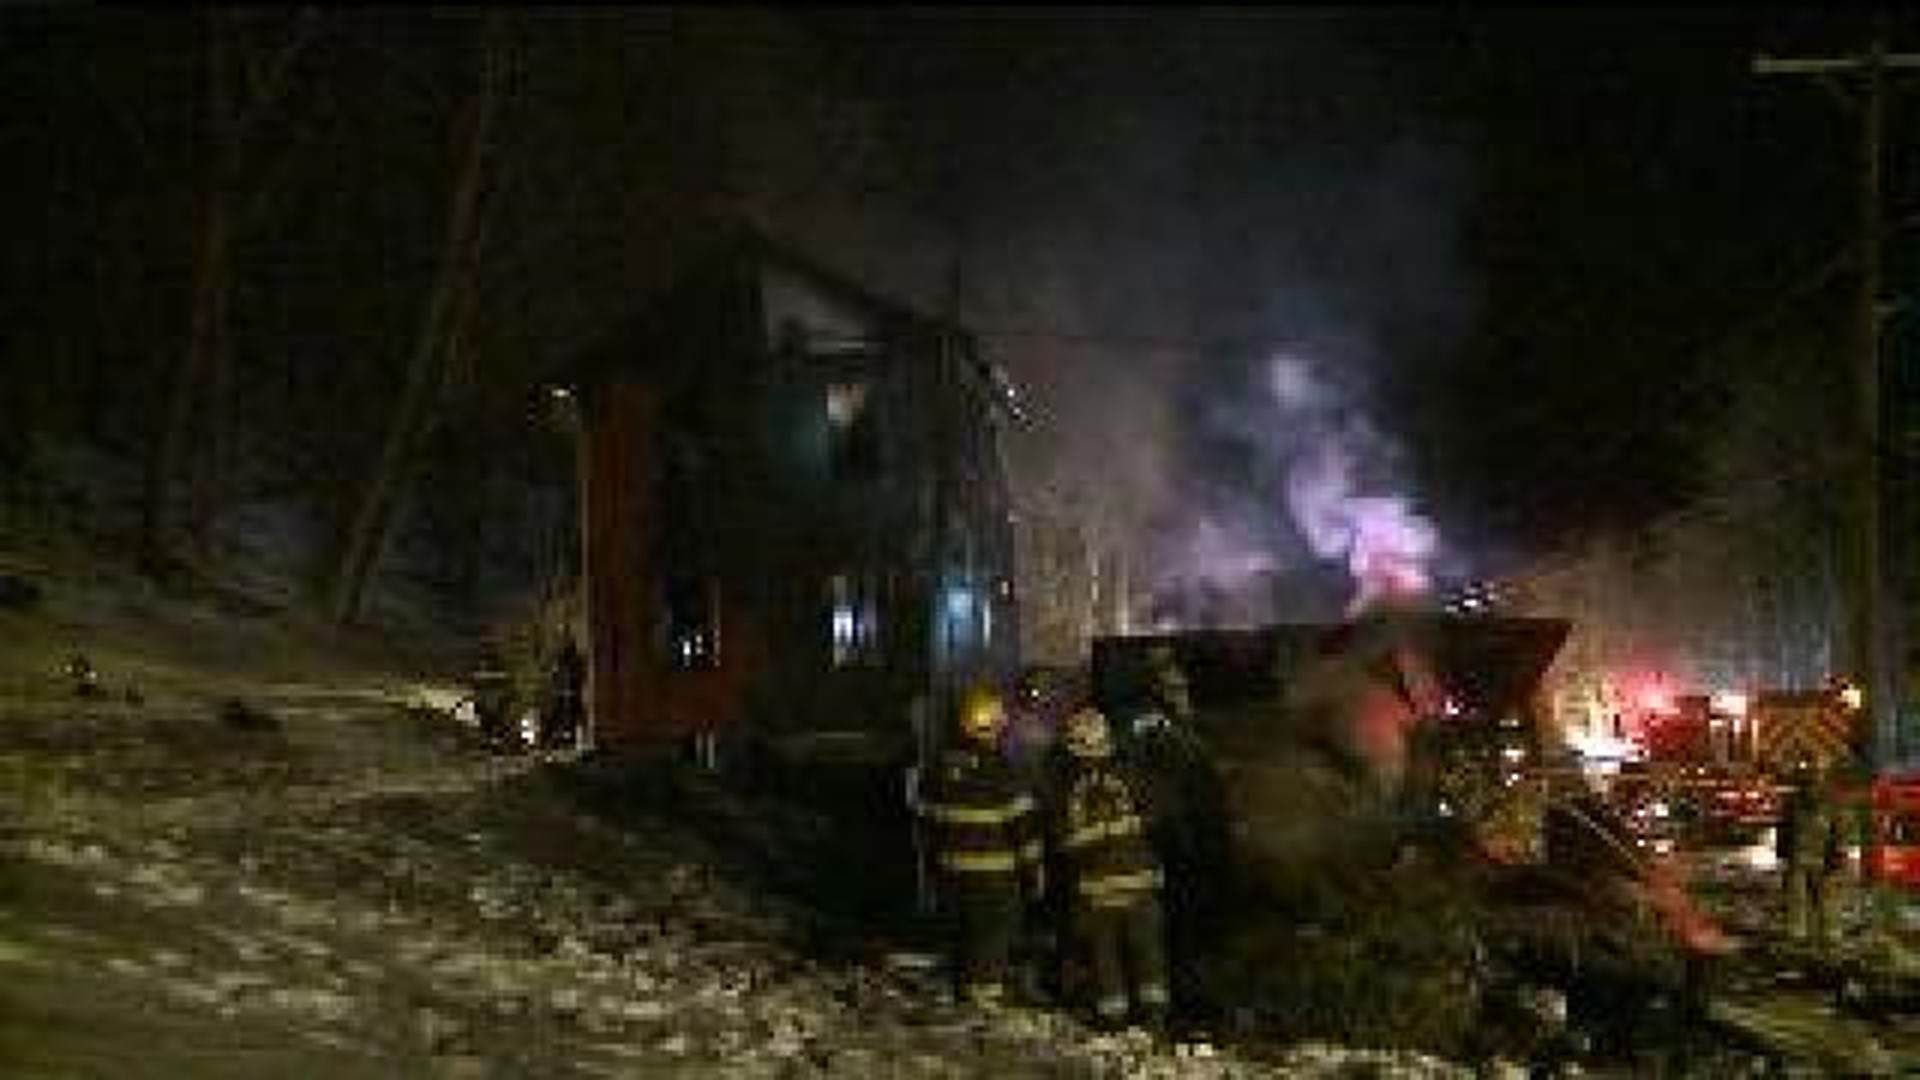 Historic Barn & Mobile Home Destroyed by Fire